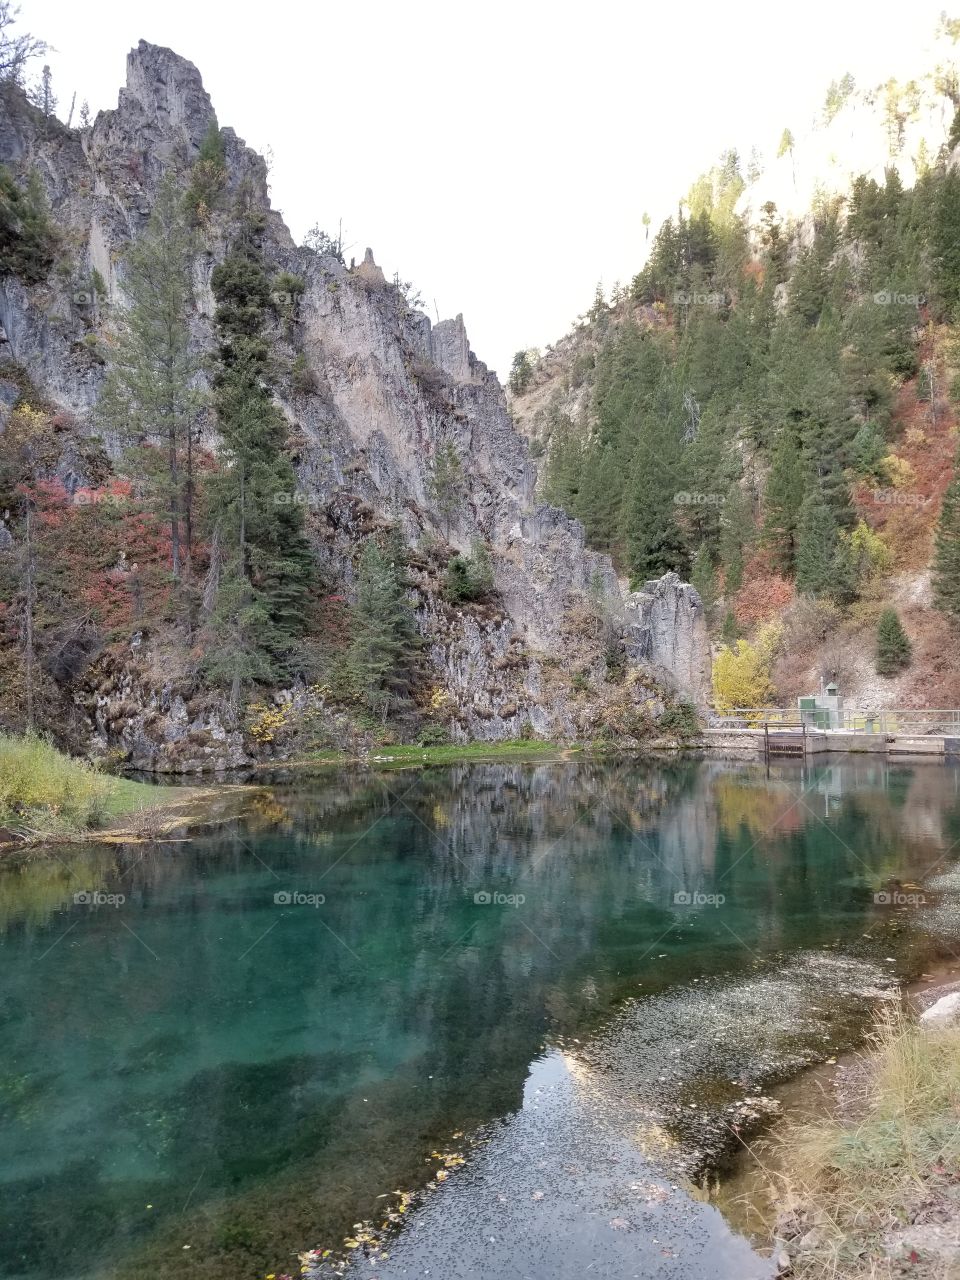 One of my favorite places in the world, an obscure canyon in Western Wyoming. Clear, cold water, with tons of visible trout.